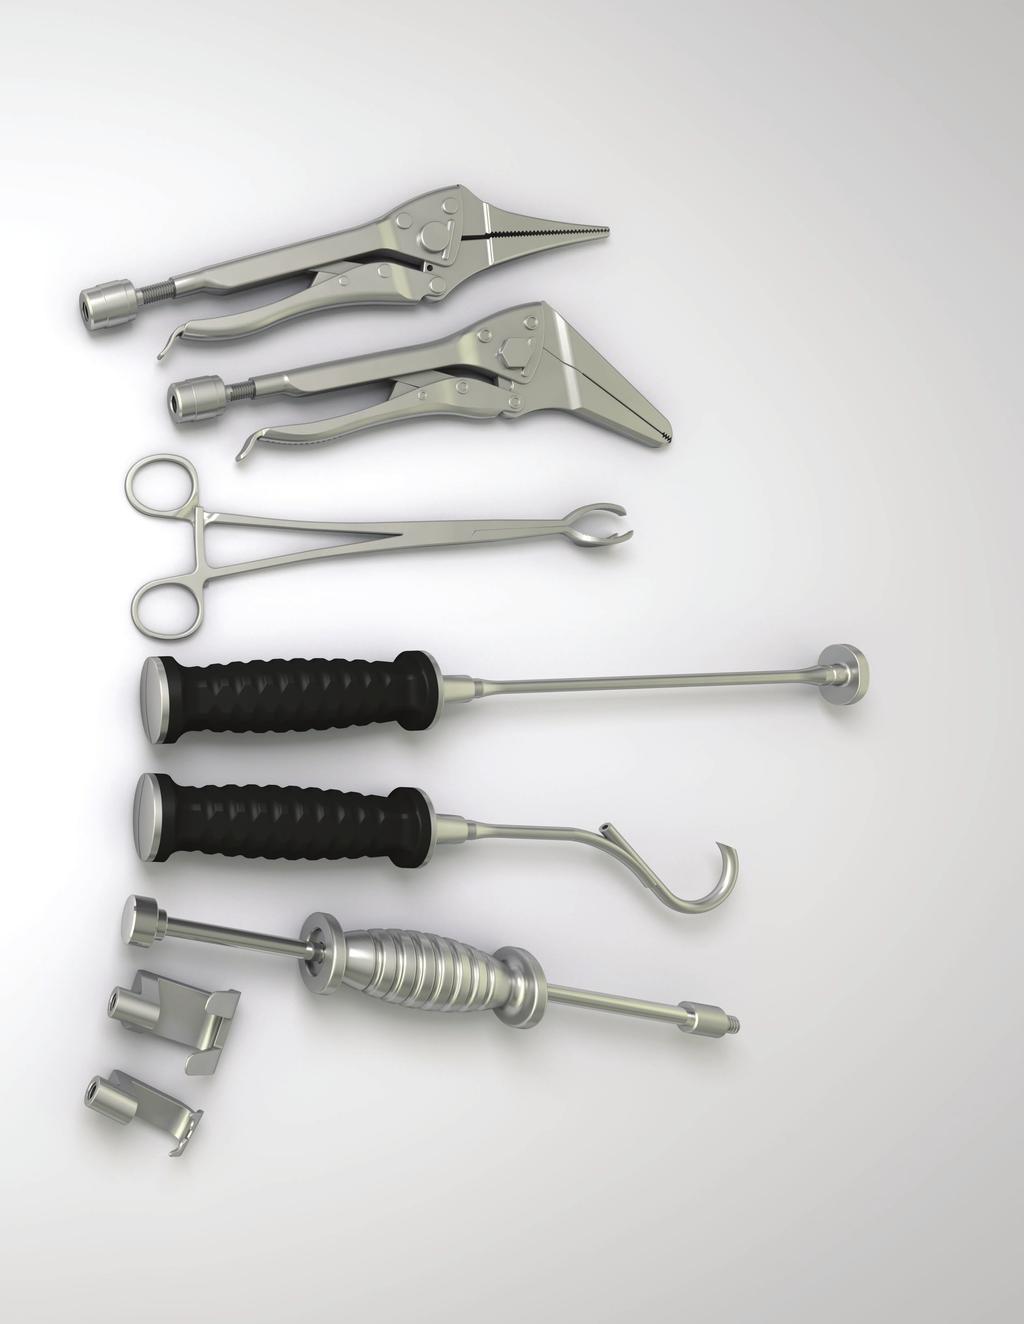 Small Locking Pliers May be used to aid in the removal of a metaglene component. Large Locking Pliers May be used to aid in the removal of humeral stem components.